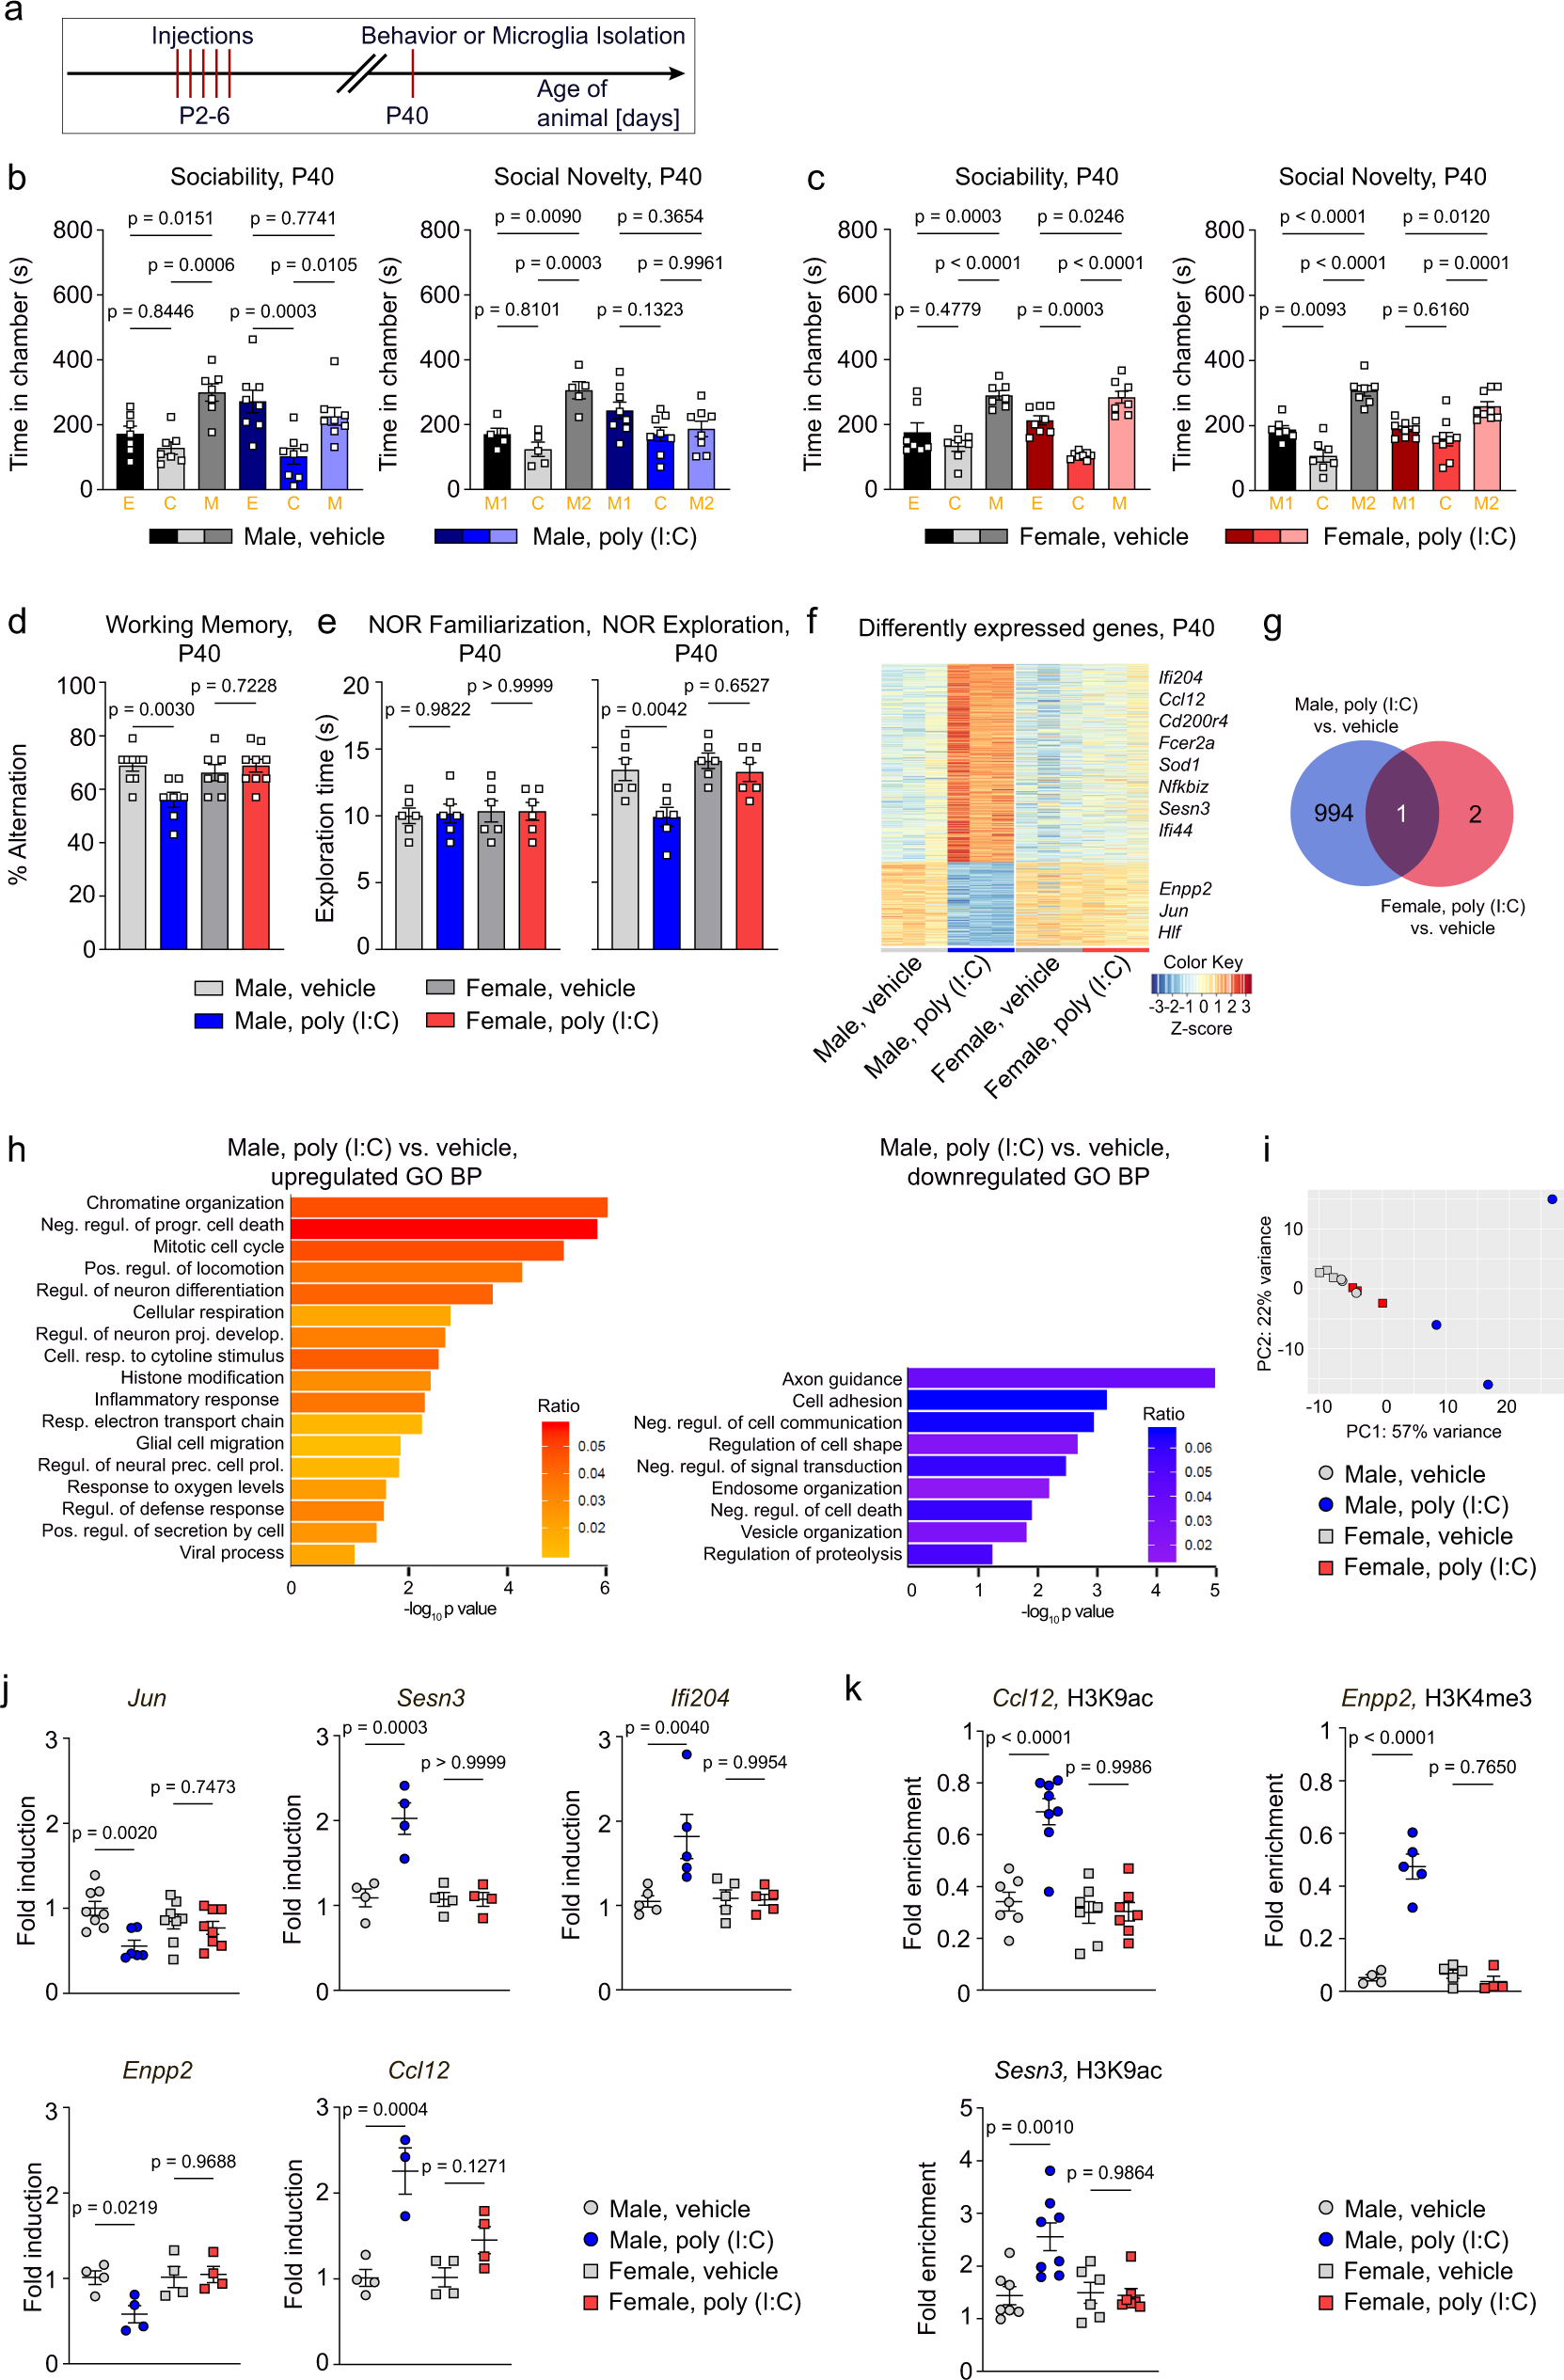 Neonatal immune challenge poses a sex-specific risk for epigenetic microglial reprogramming and behavioral impairment Nature Communications